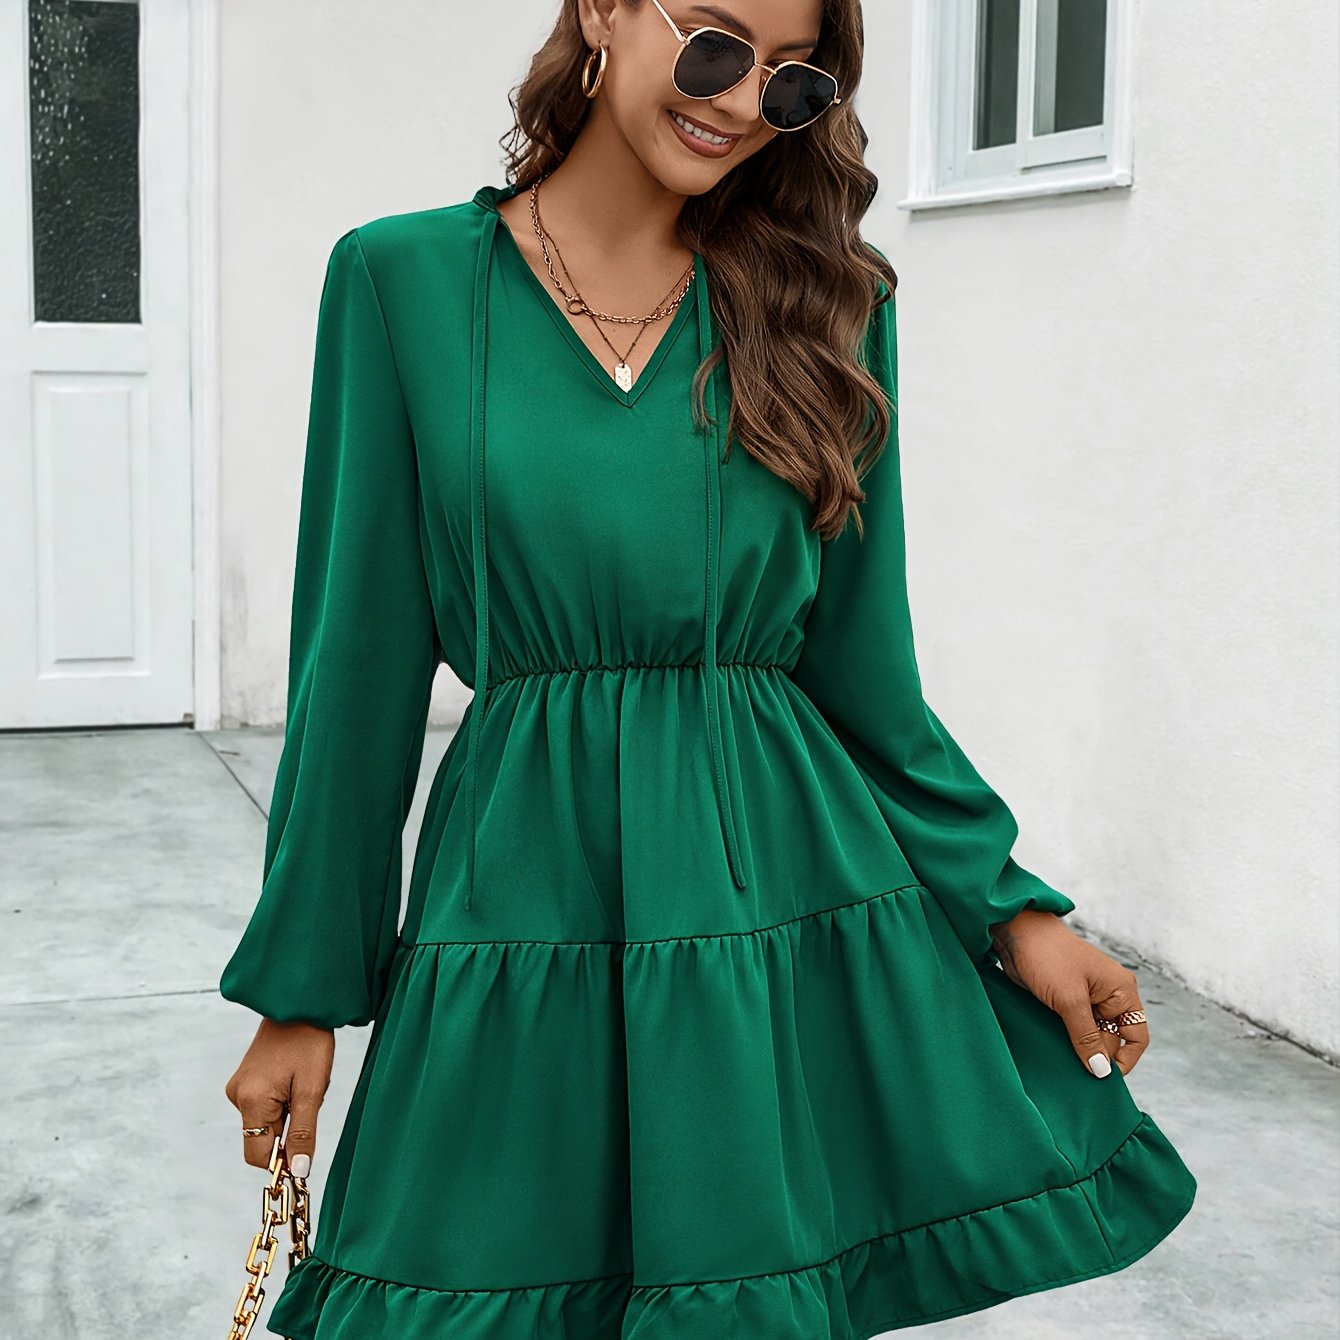 Antmvs Solid Color Lantern Sleeve Dress, Casual A-line Tie-neck Dress For Spring & Fall, Women's Clothing